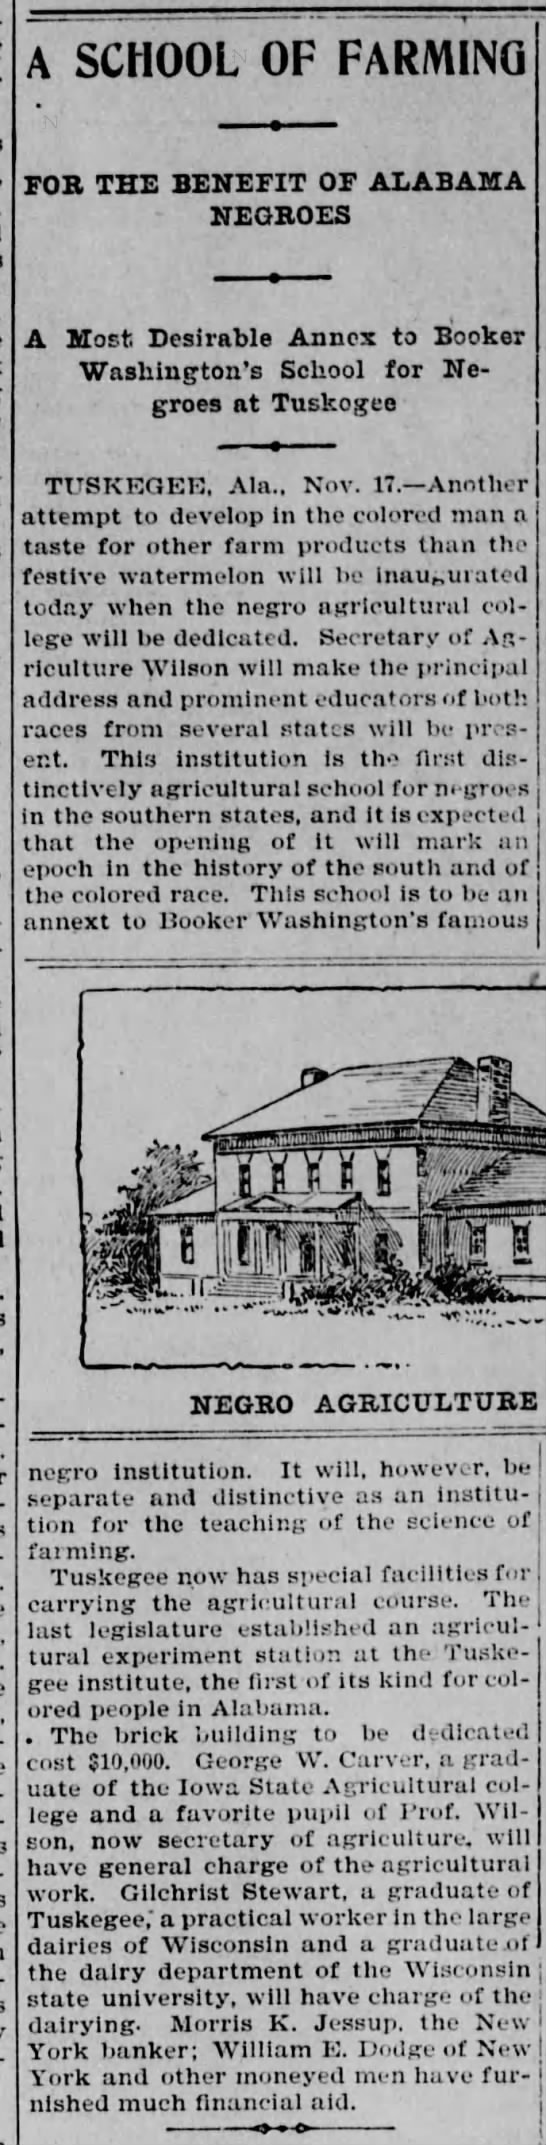 George Washington Carver to head Agriculture Department at Tuskegee Institute, 1897 - 